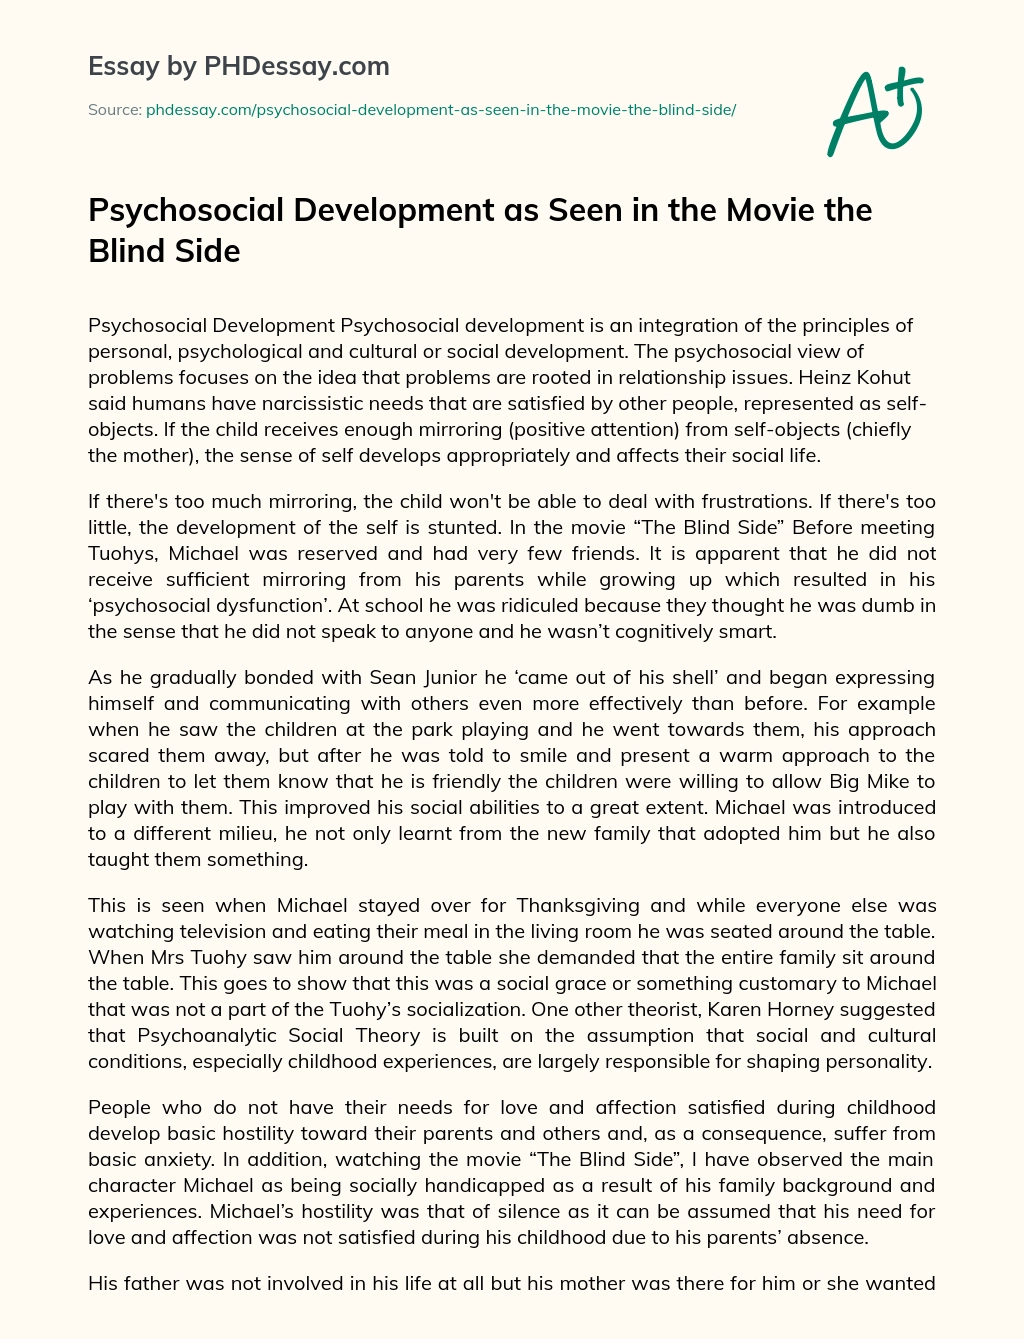 Psychosocial Development as Seen in the Movie the Blind Side essay